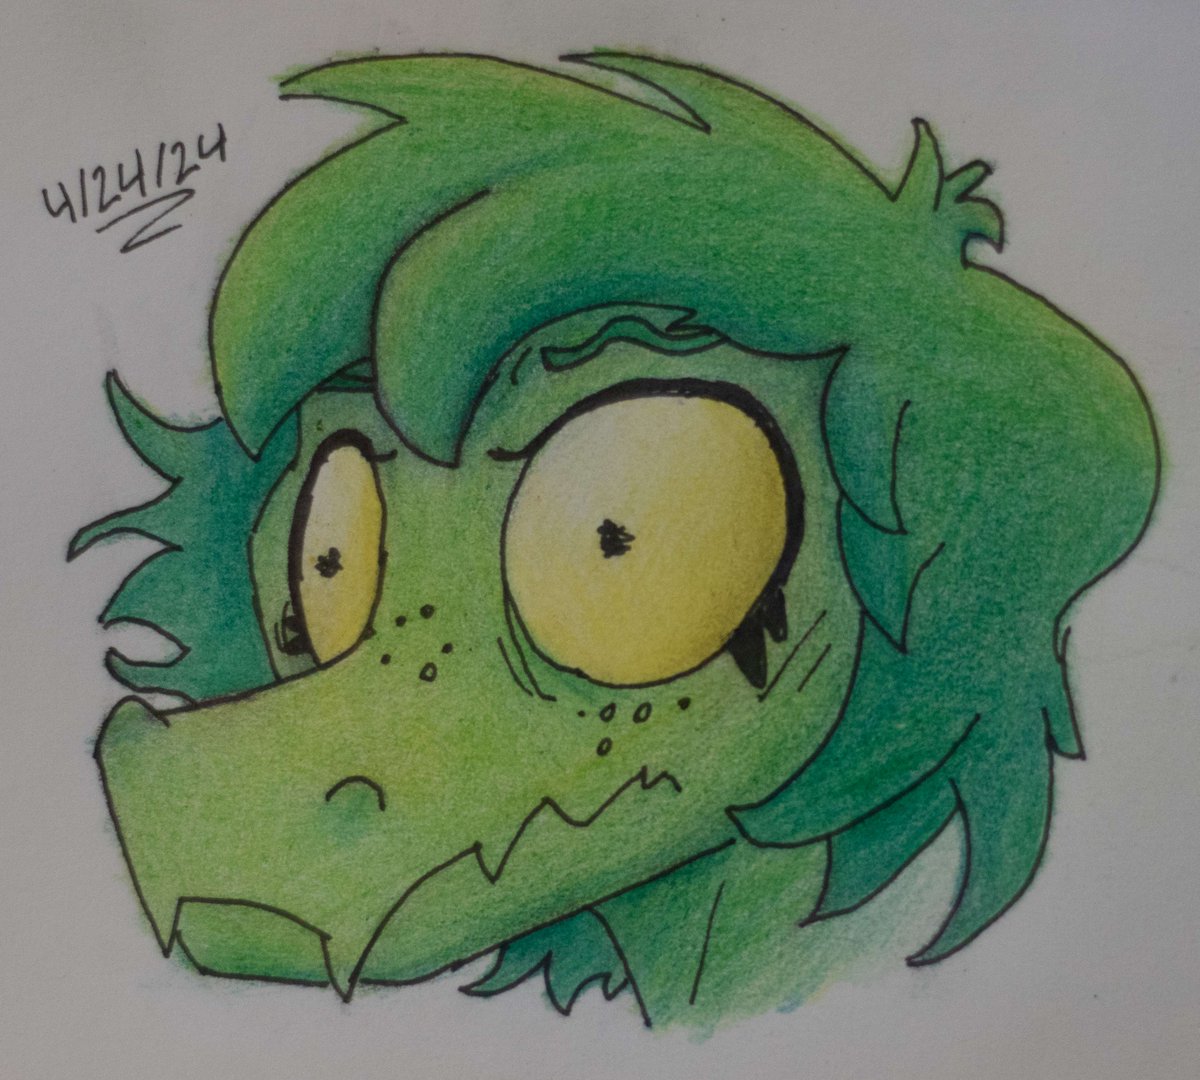 More Olivia -- this time in colored pencil!

#IWaniHugthatGator #IWaniHugThatGatorArt #Snootgameart #pencilart